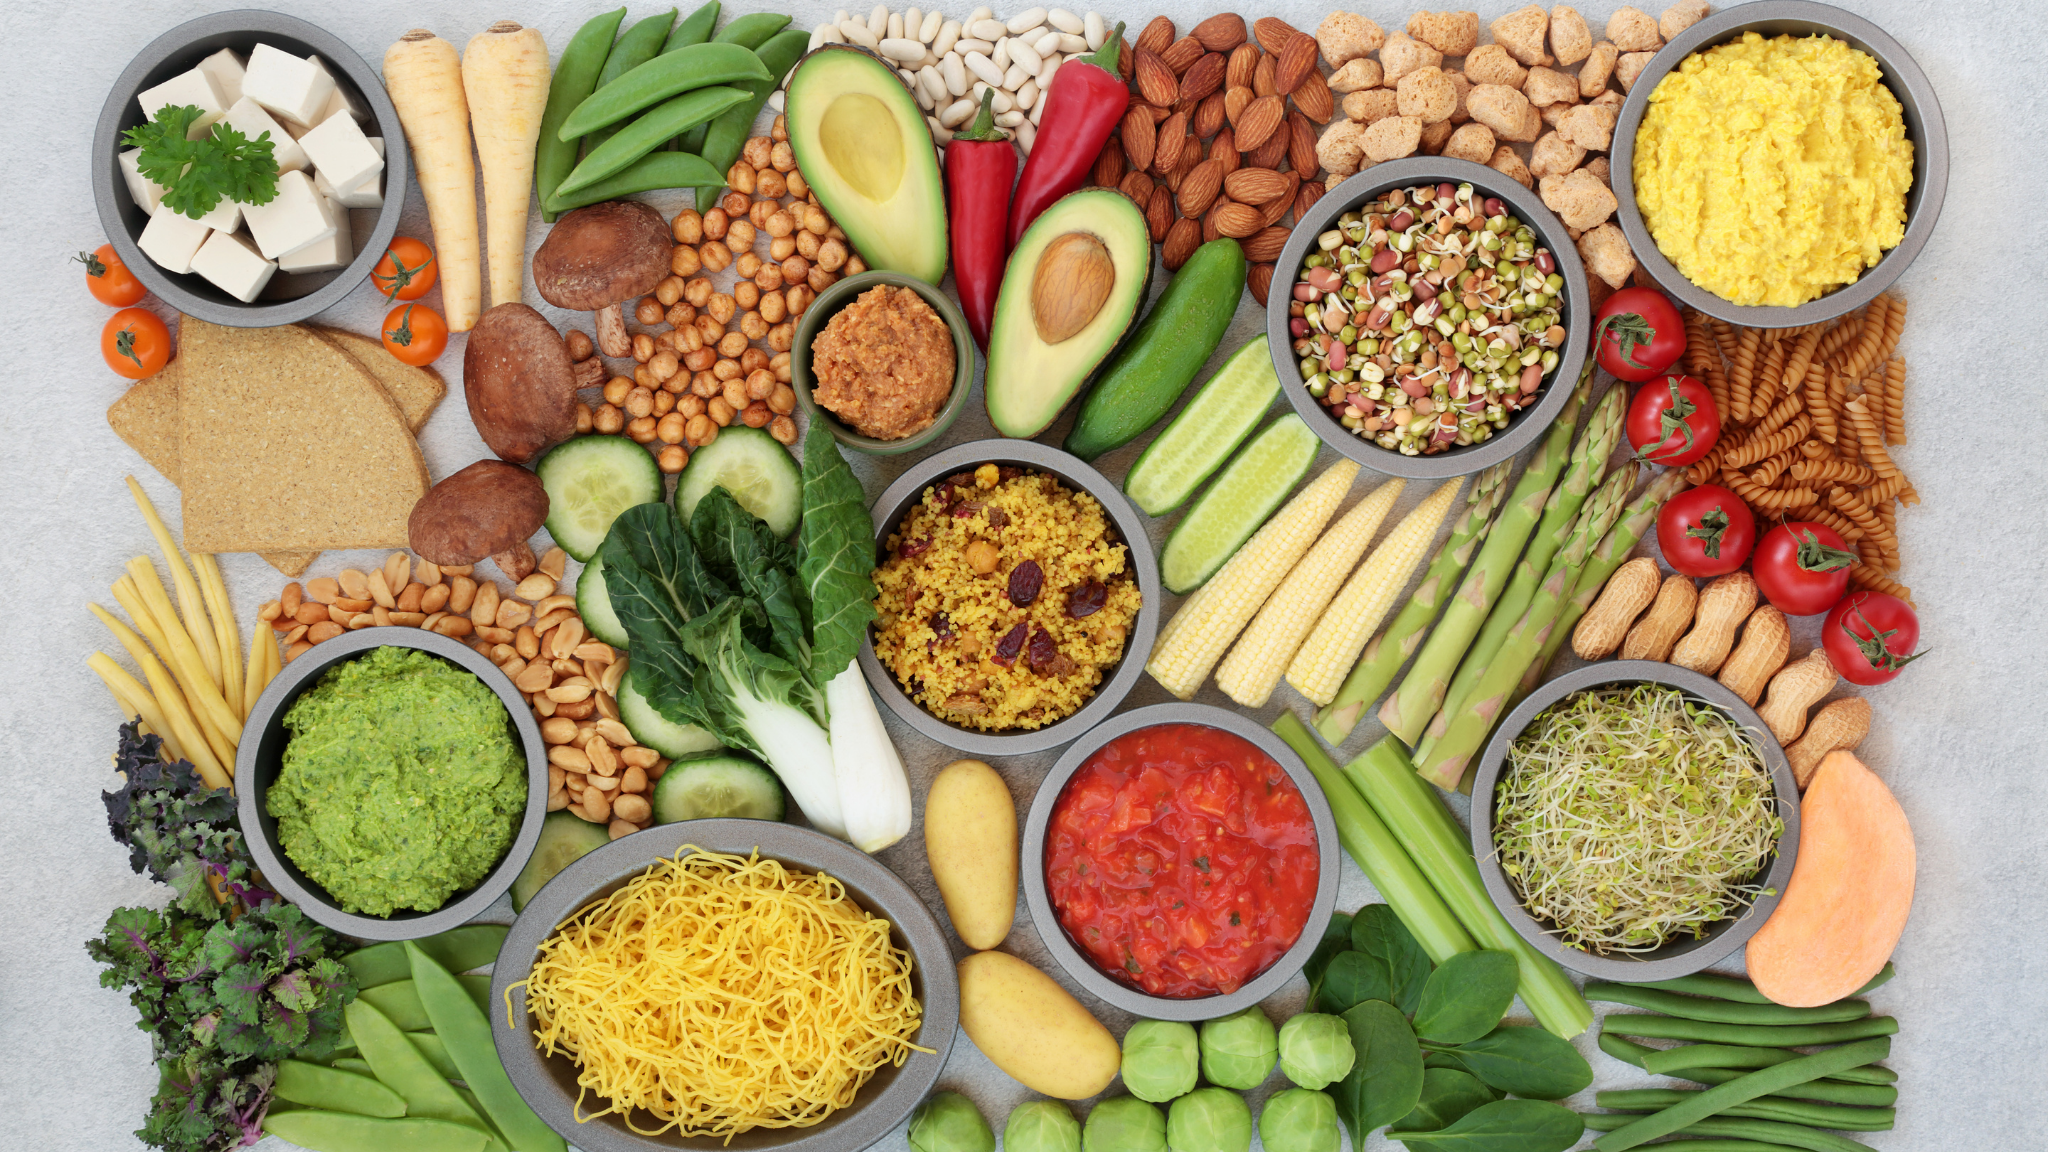 Try Out These Tips To Get Started With A Plant-Based Diet